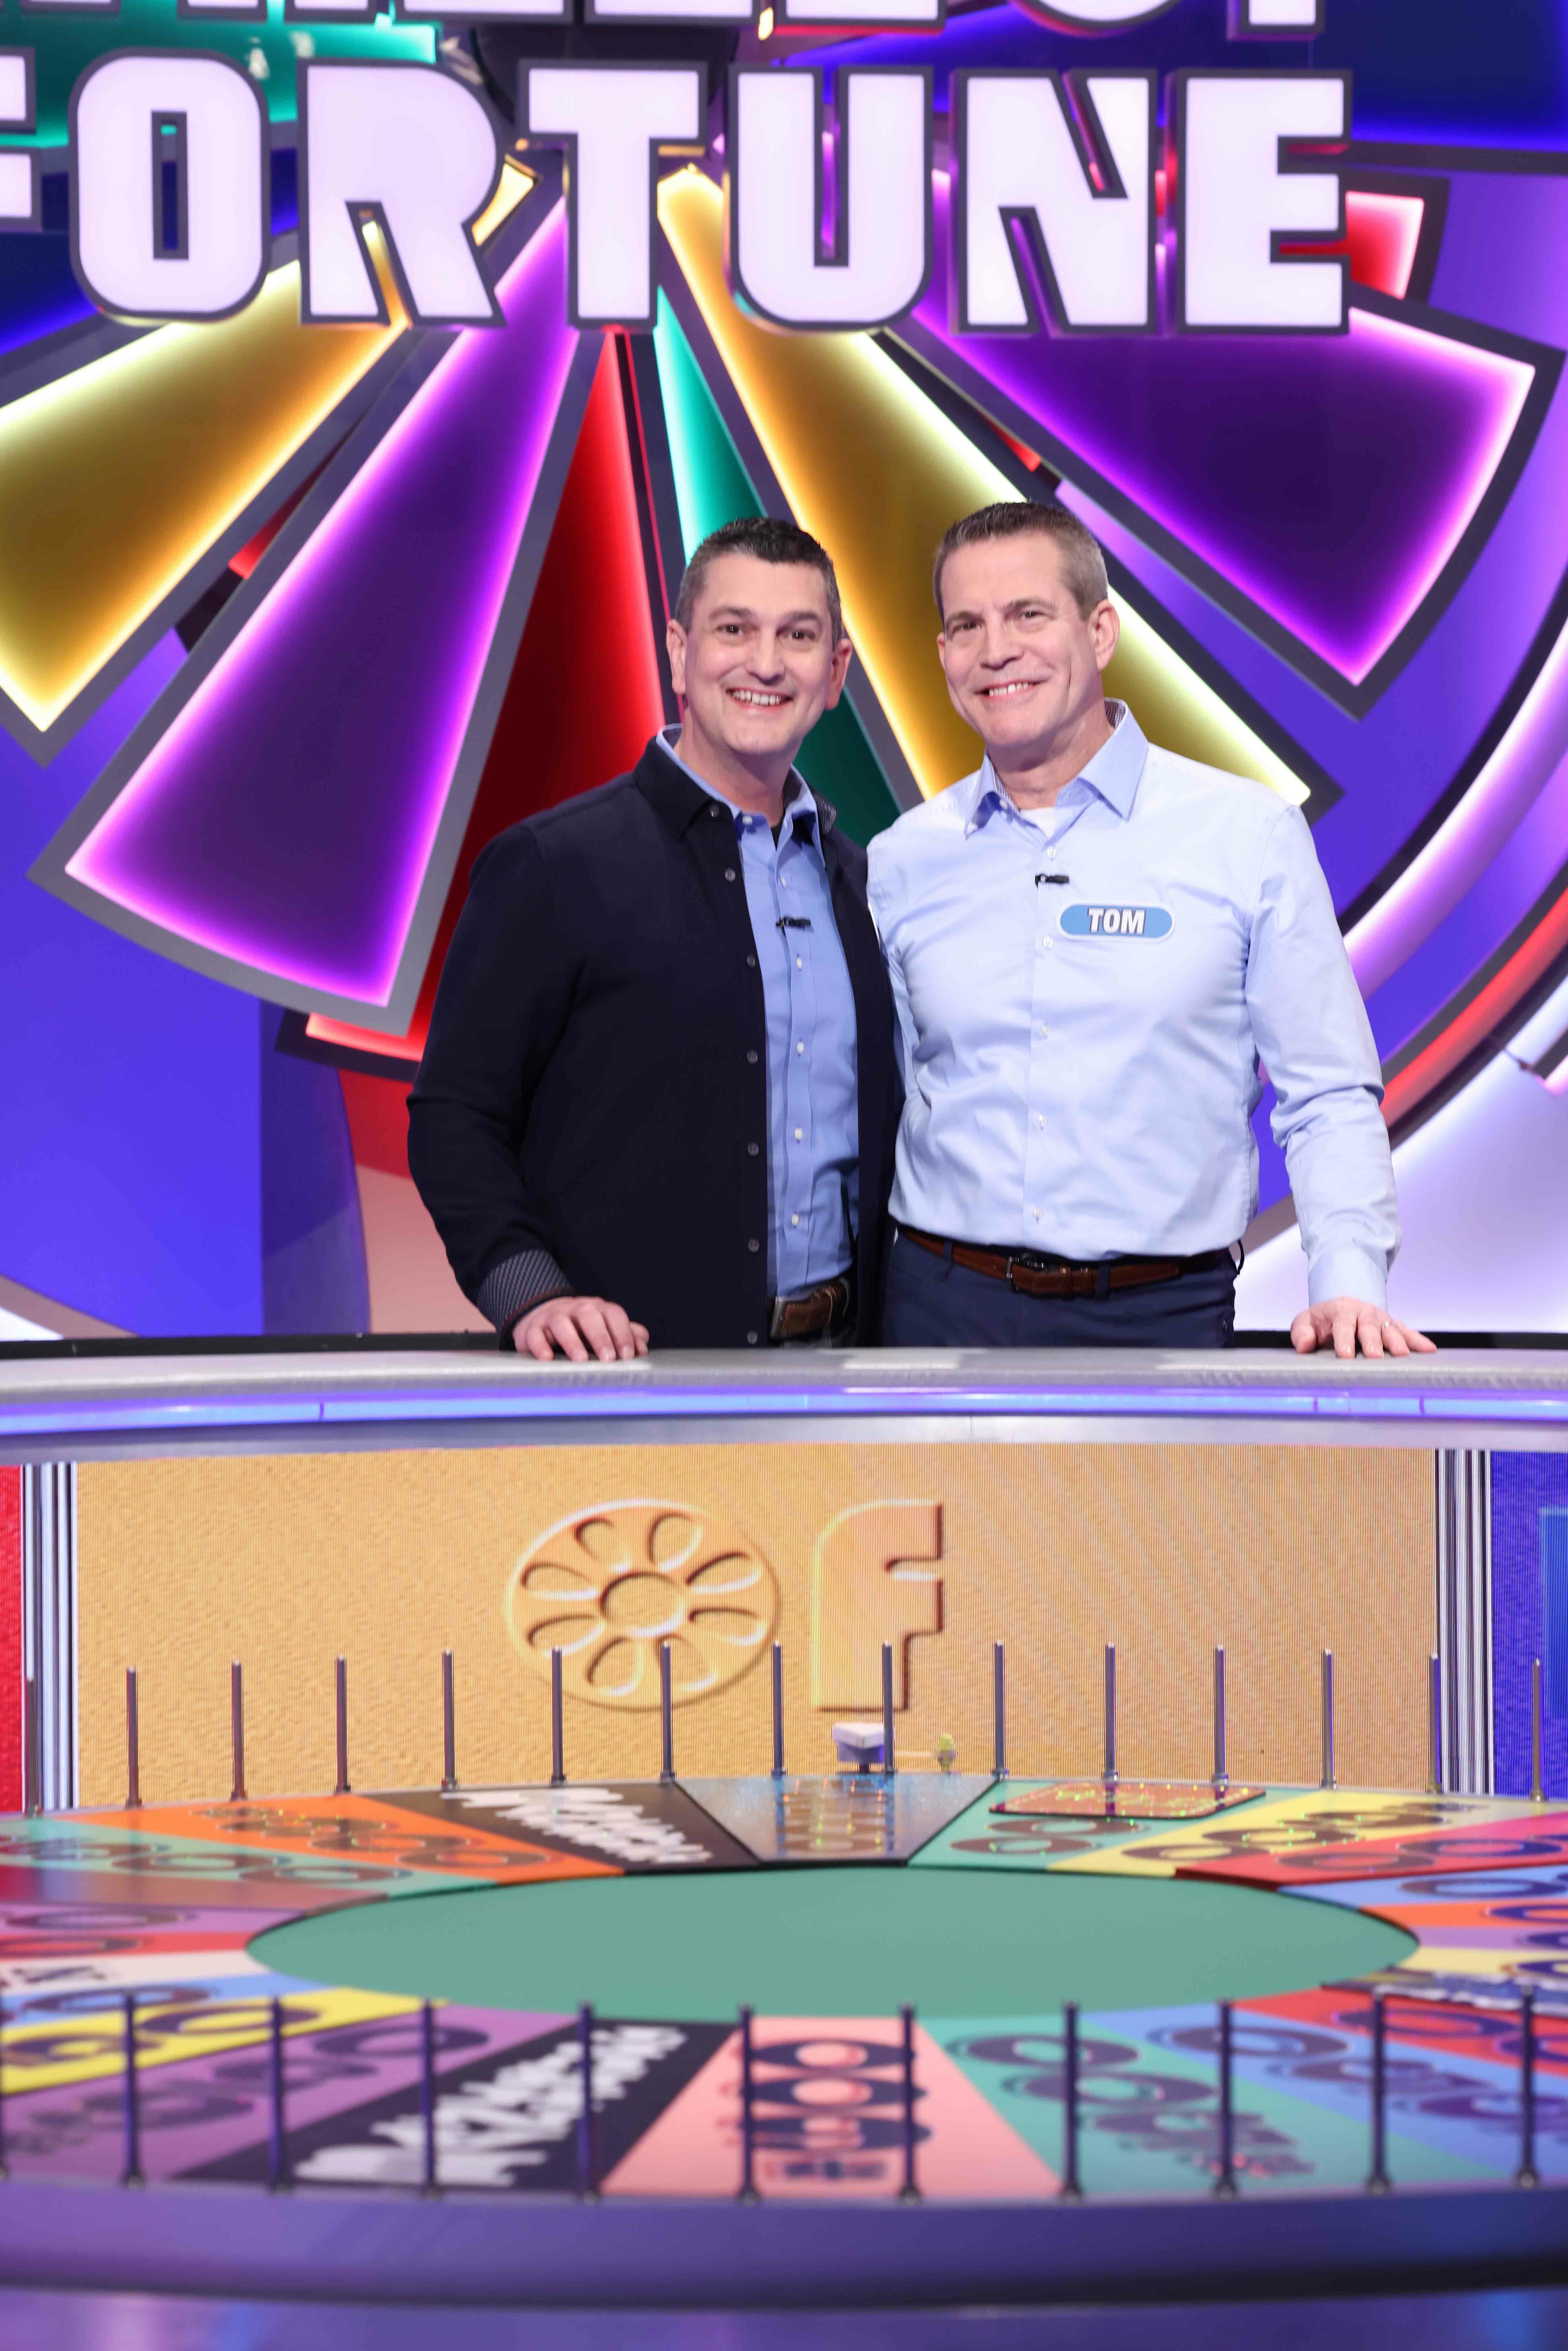 Greg Ruvolo and Tom Bayer on the "Wheel of Fortune" set. Courtesy photo